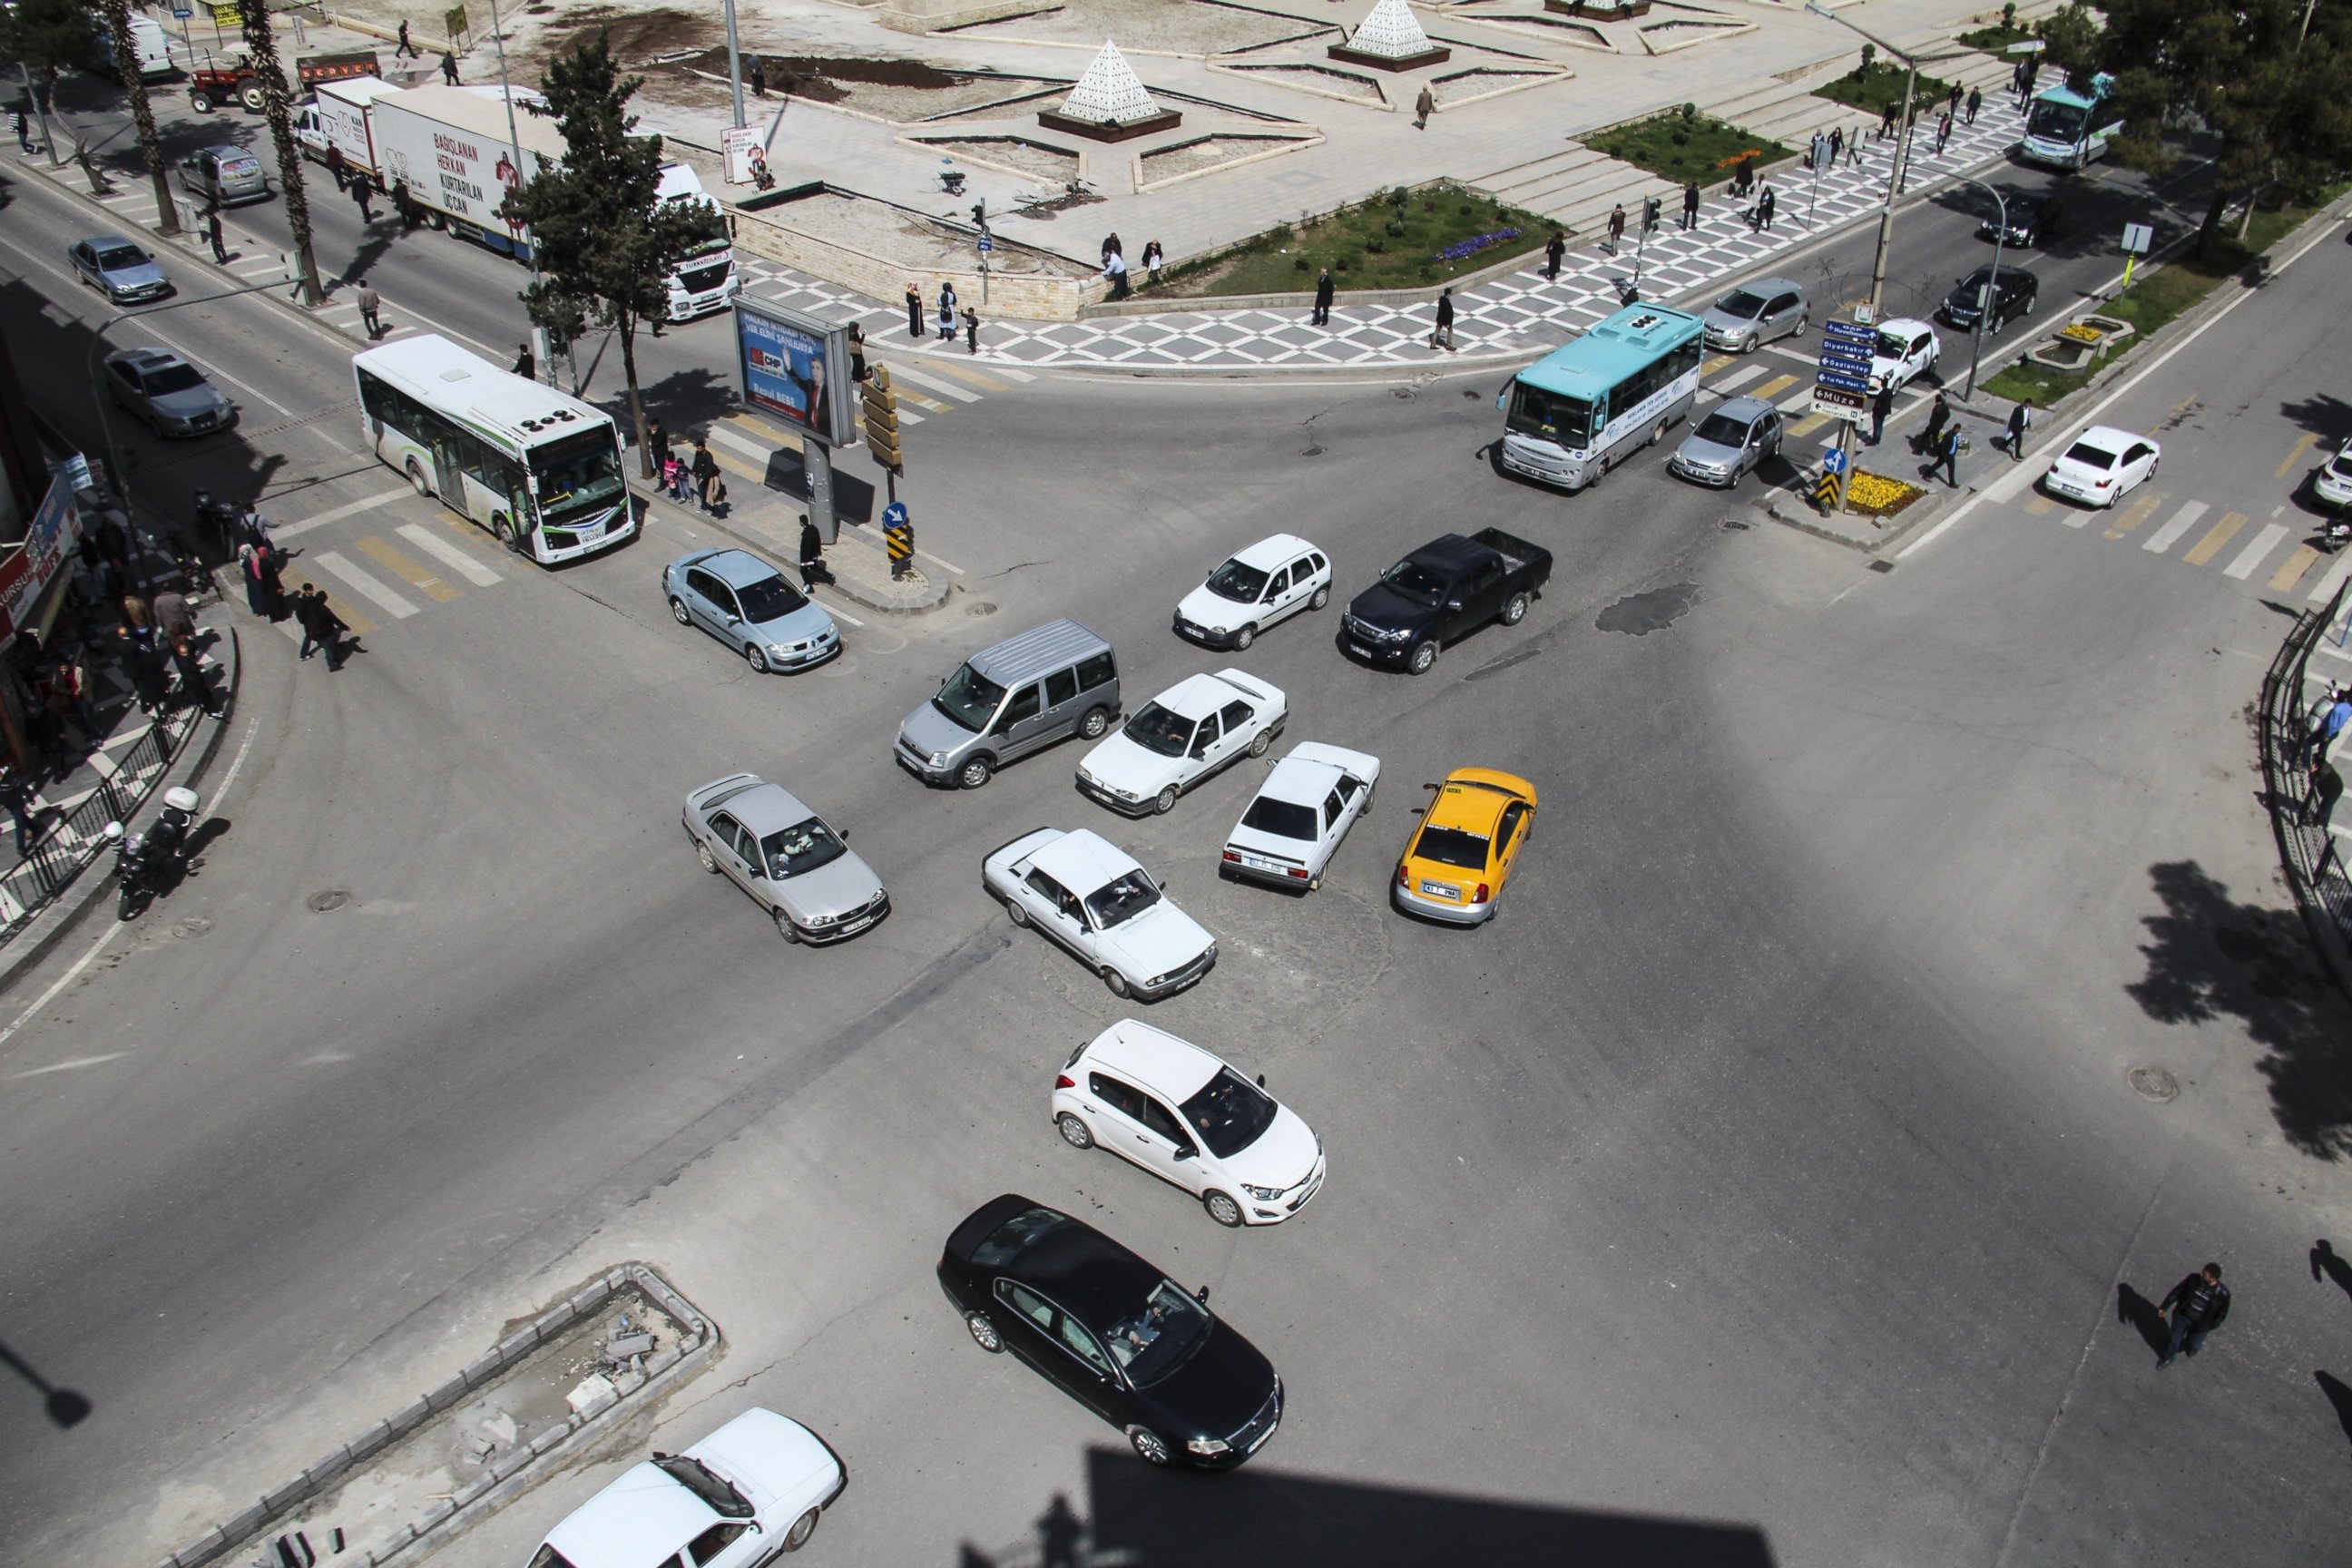 PHOTO: Cars crowd an intersection due to a non-functioning traffic light in the city of Sanliurfa